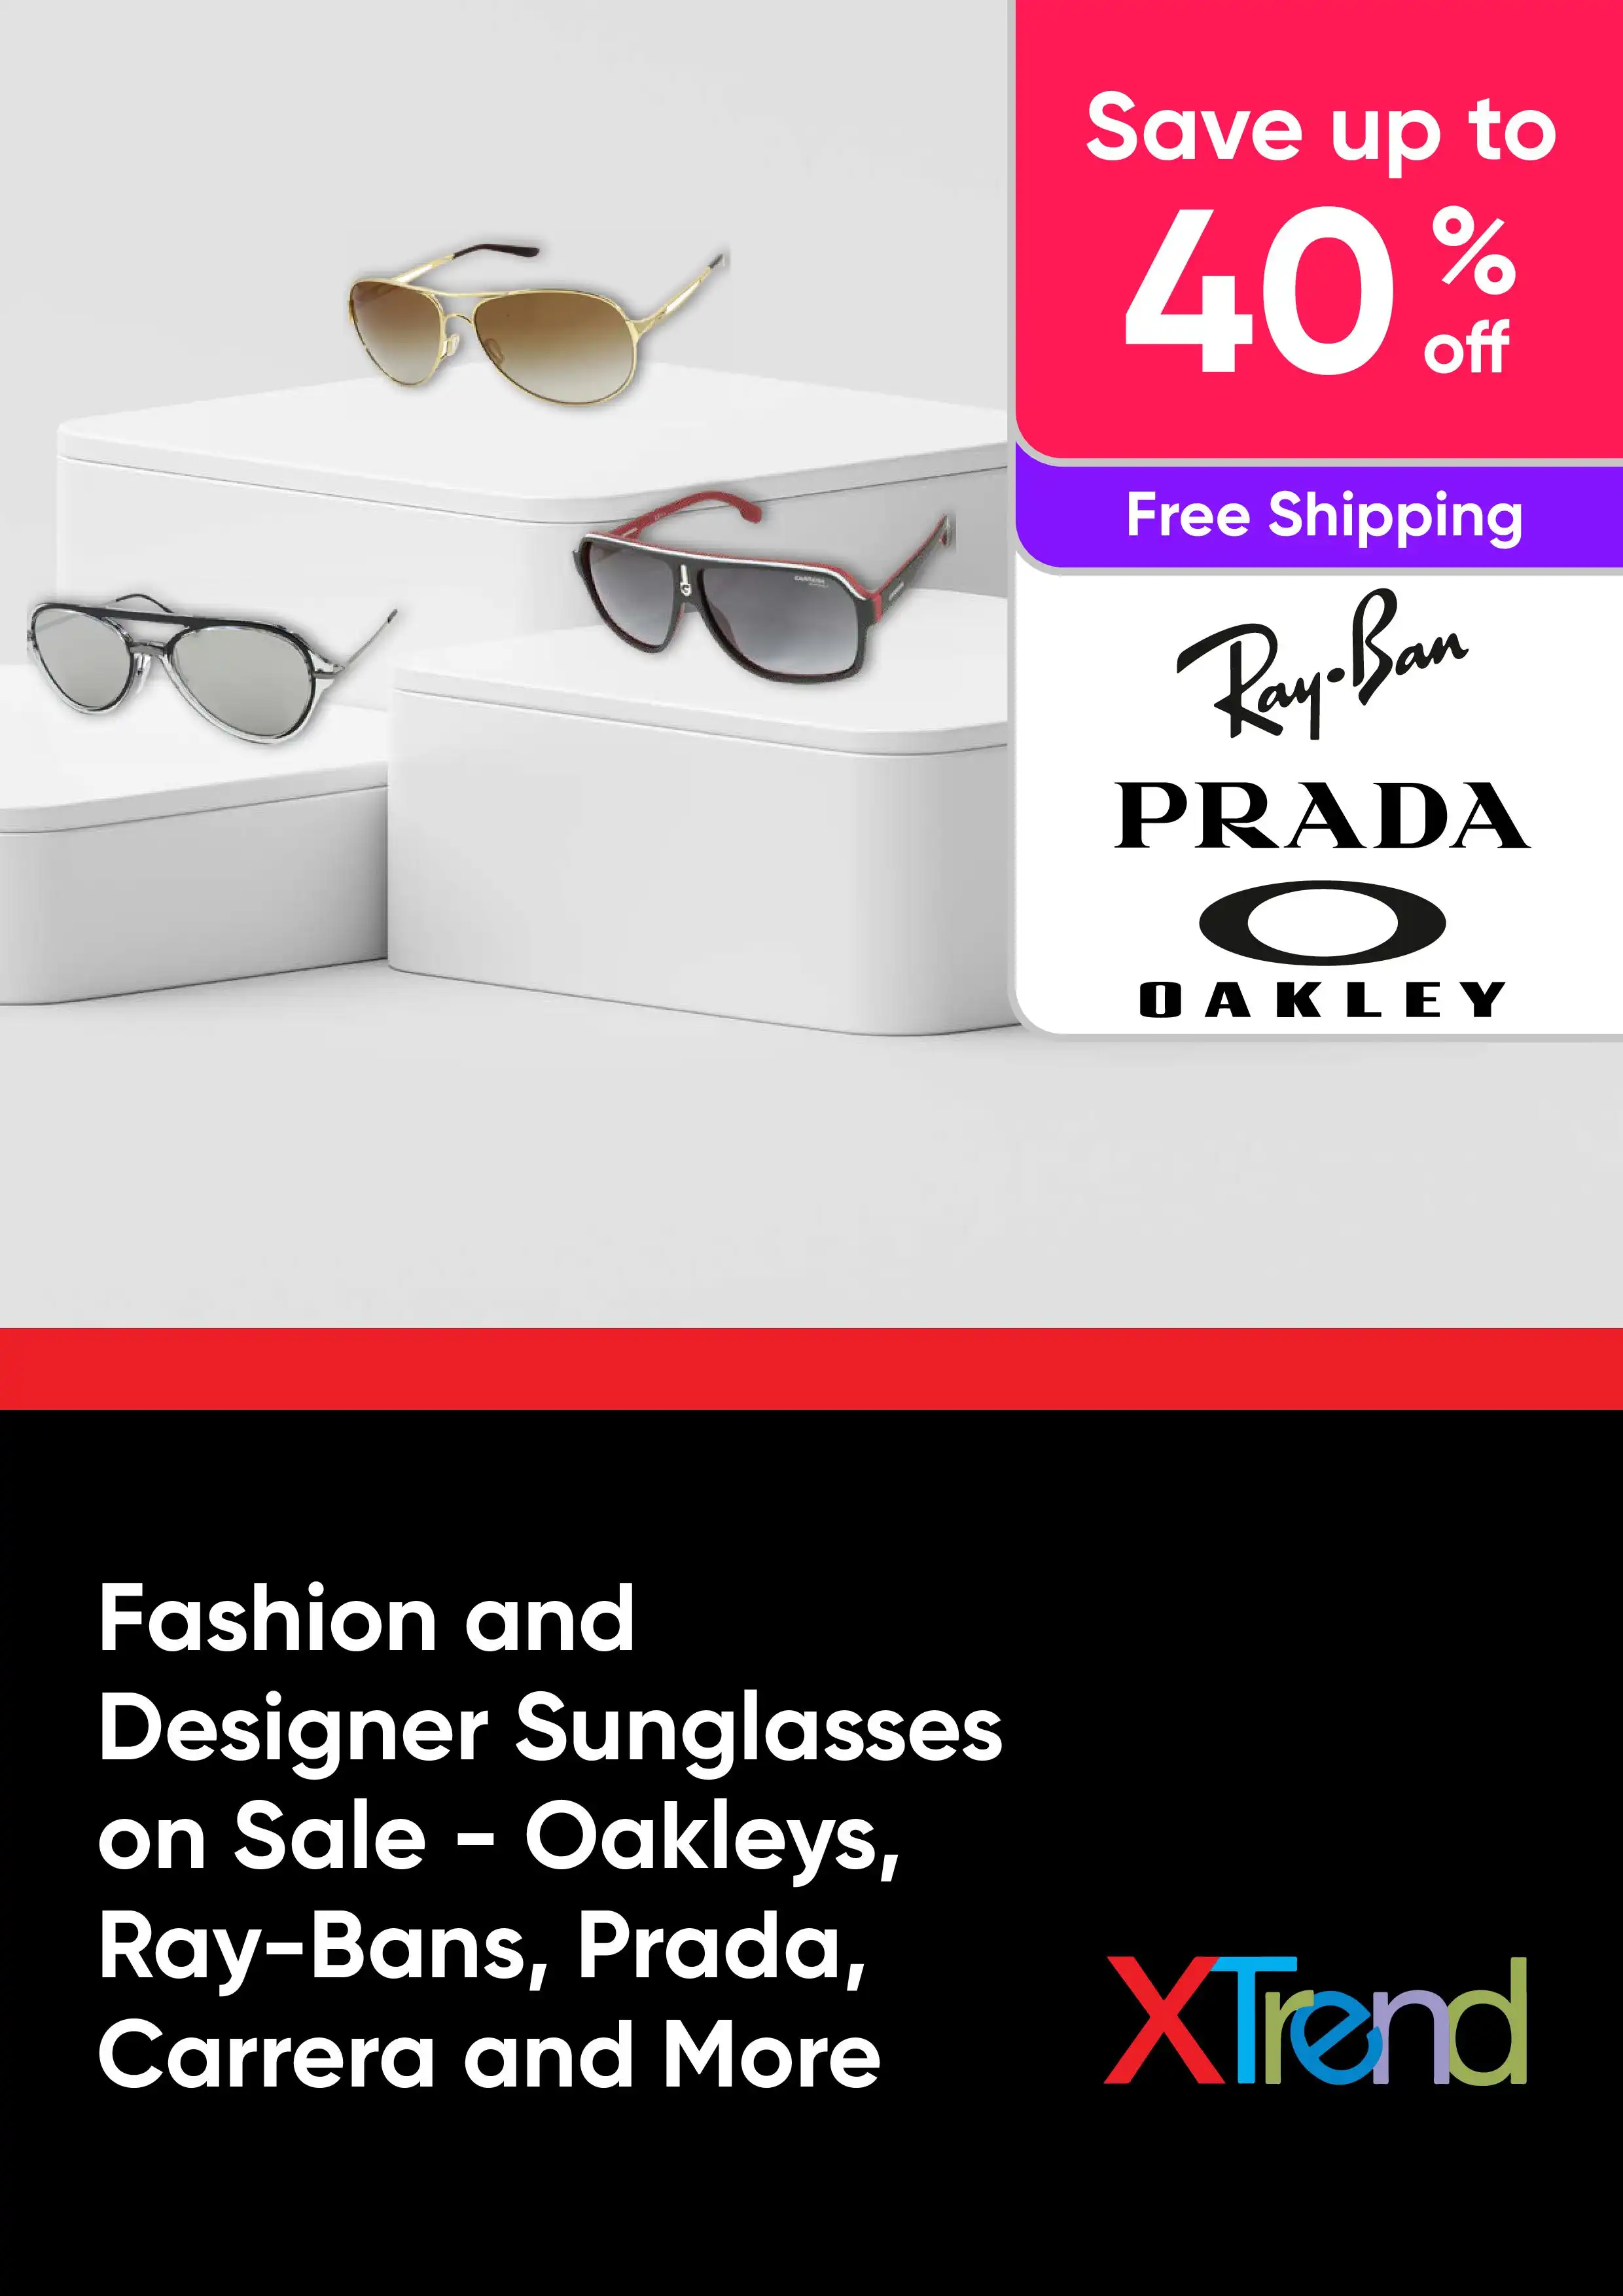 Fashion and Designer Sunglasses Sale - Save Up To 40% Off Oakleys, Ray-Bans, Carrera